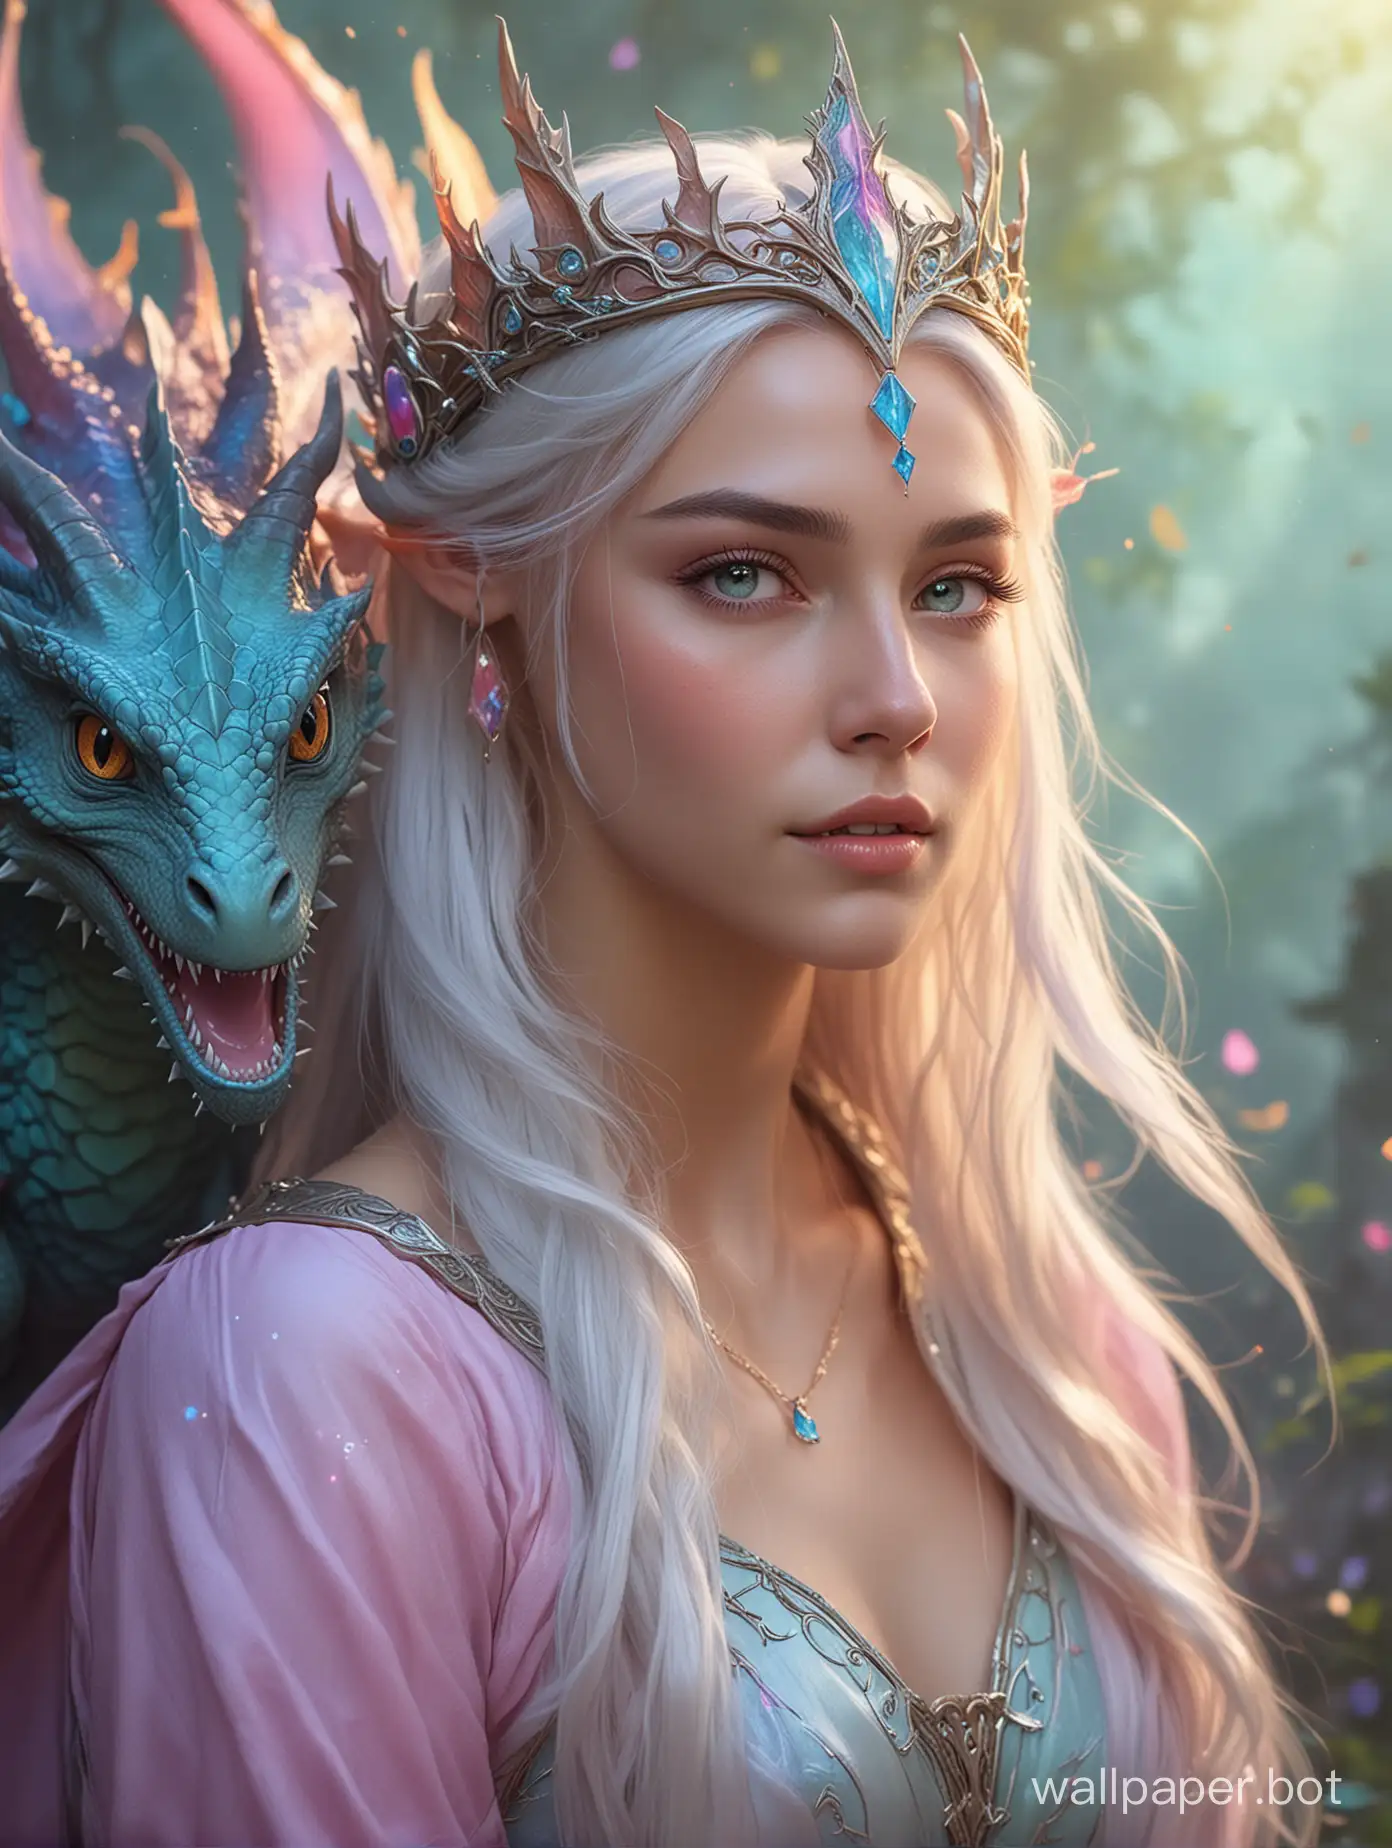 imagine a fantastic scene of a 21 year old female elven queen wearing a magical crown communing with a tiny dragon, use your unbounded creativity to create a magical realm of vibrant pastels and colors ,cinematic